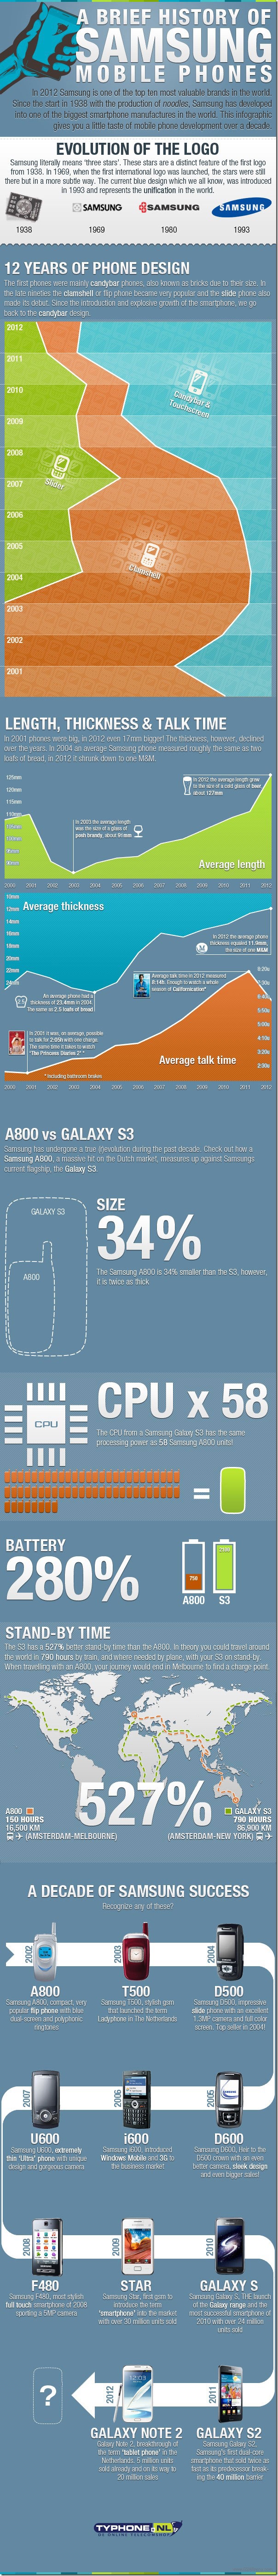 Samsung’s Amazing History Shown in an Infographic